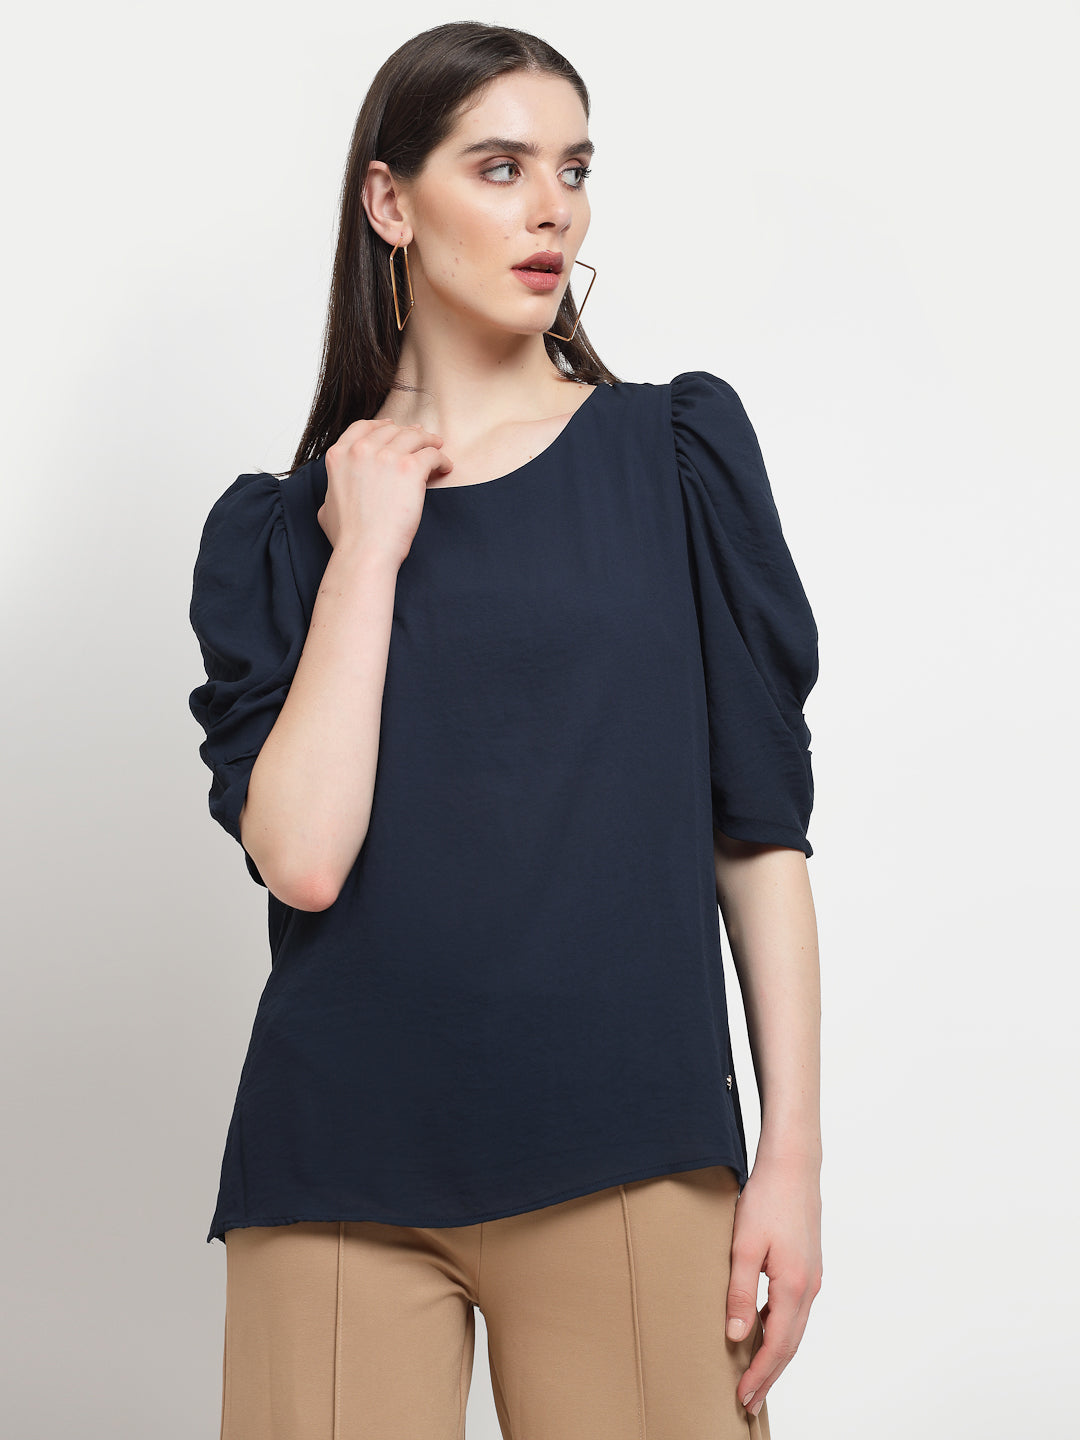 Gipsy Navy Georgette Blouse